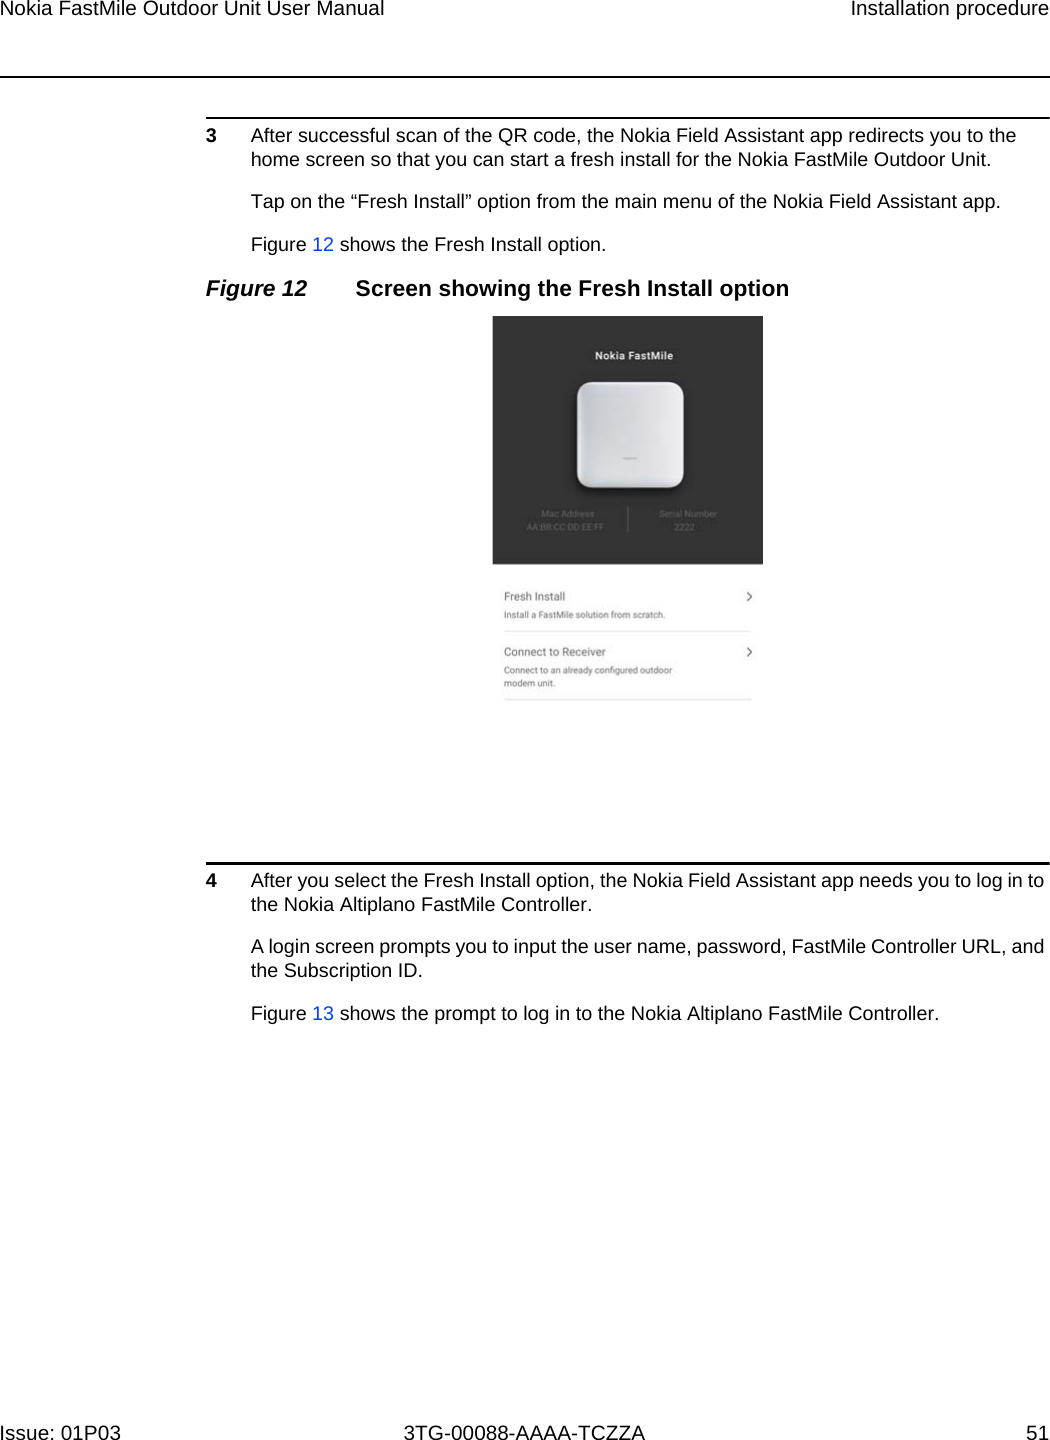 Page 46 of Nokia Bell 34003800FM20 FastMile Compact User Manual Nokia FastMile Outdoor Unit